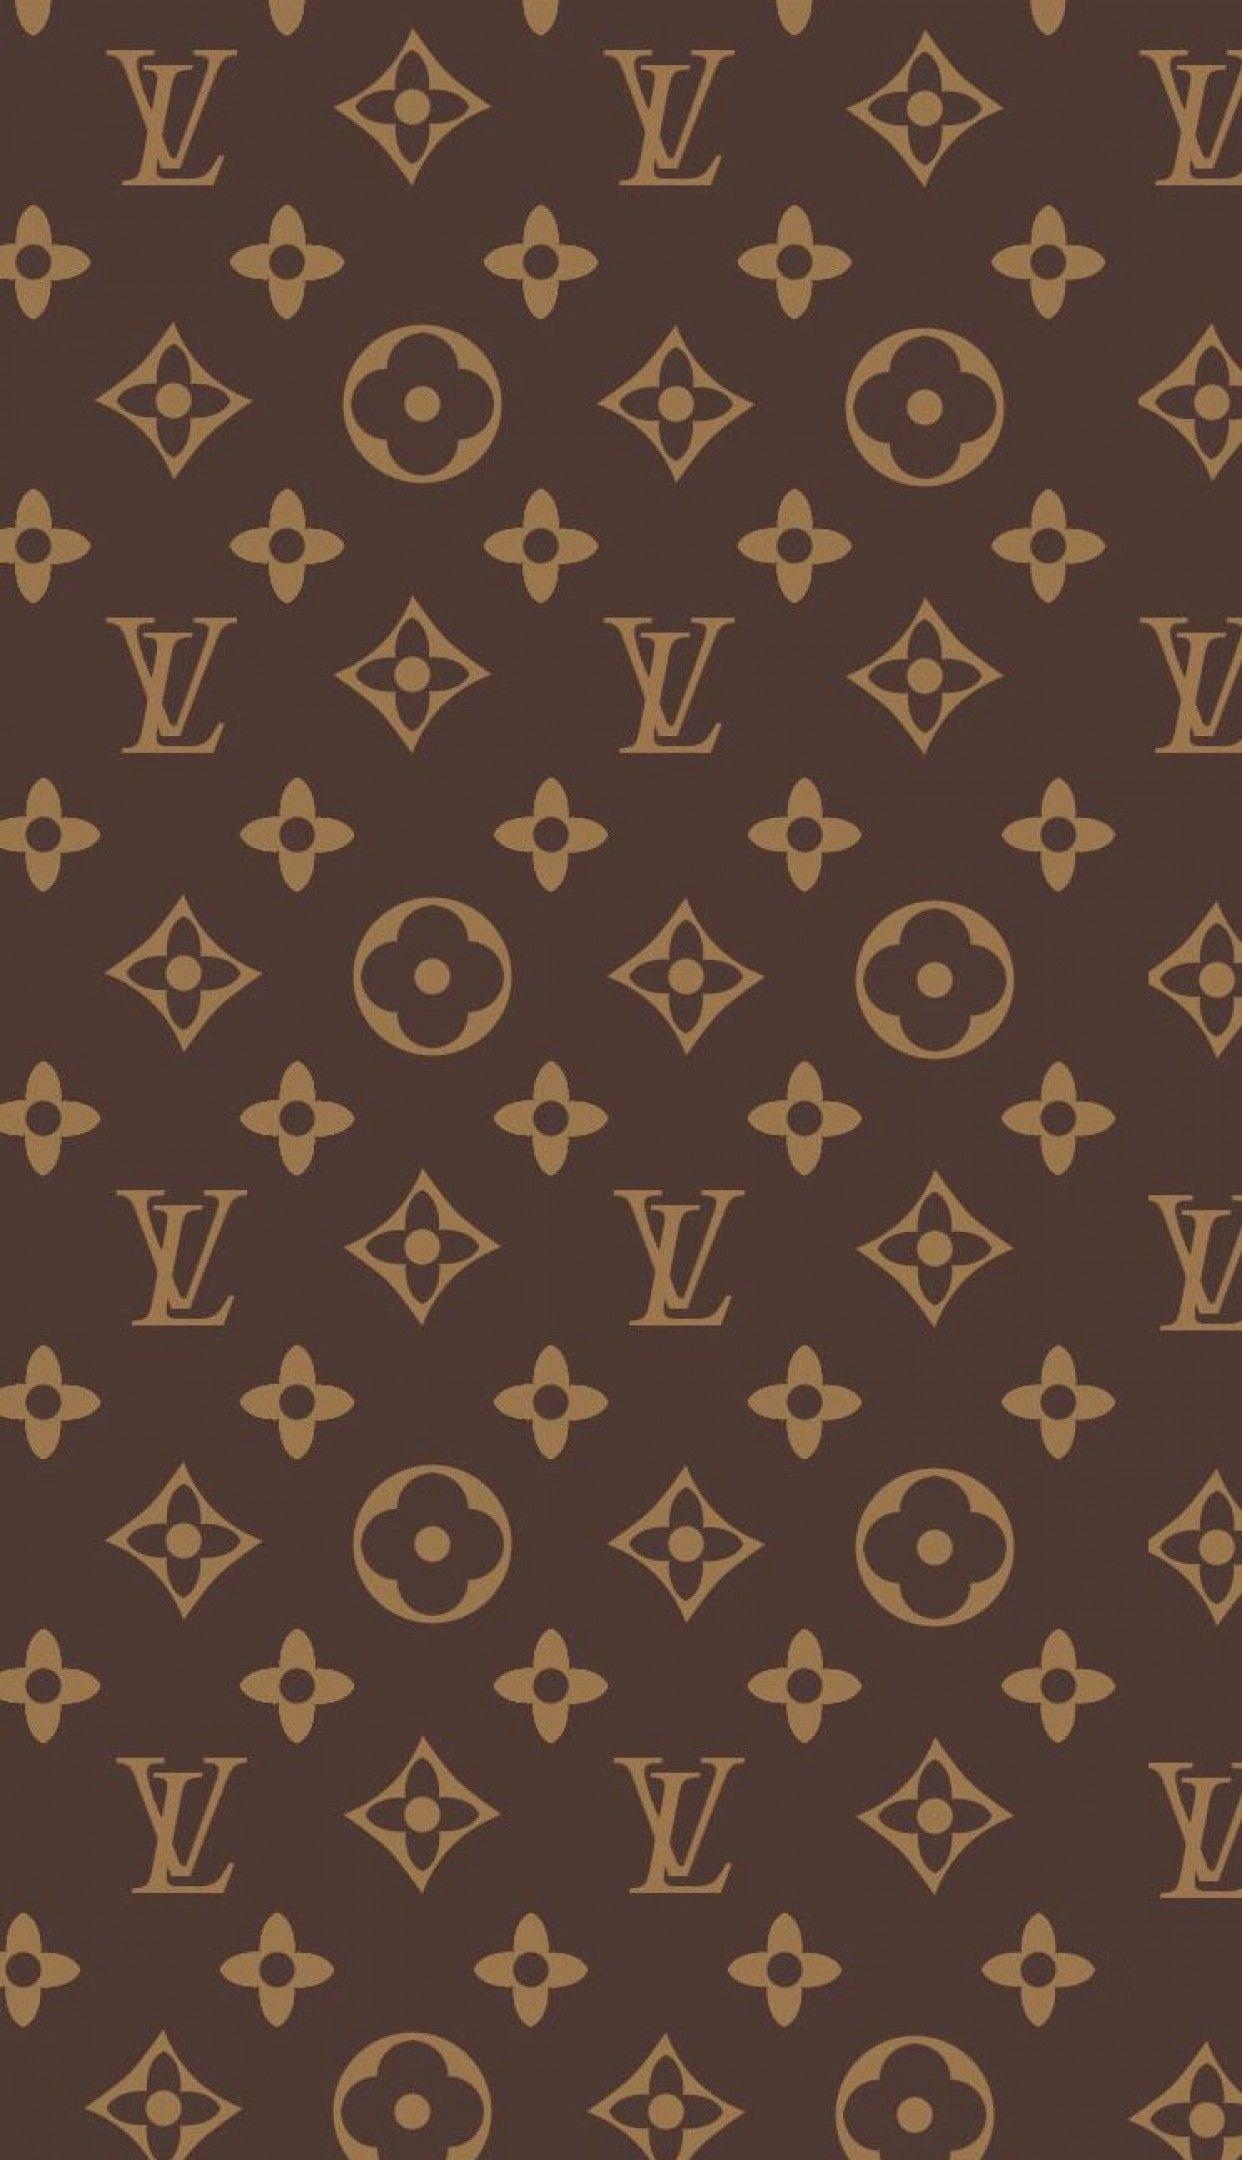 Hd wallpapers and background images See more ideas about louis vuitton  iphone wallpaper  Monogram wallpaper Pink wallpaper iphone Louis vuitton  iphone wallpaper